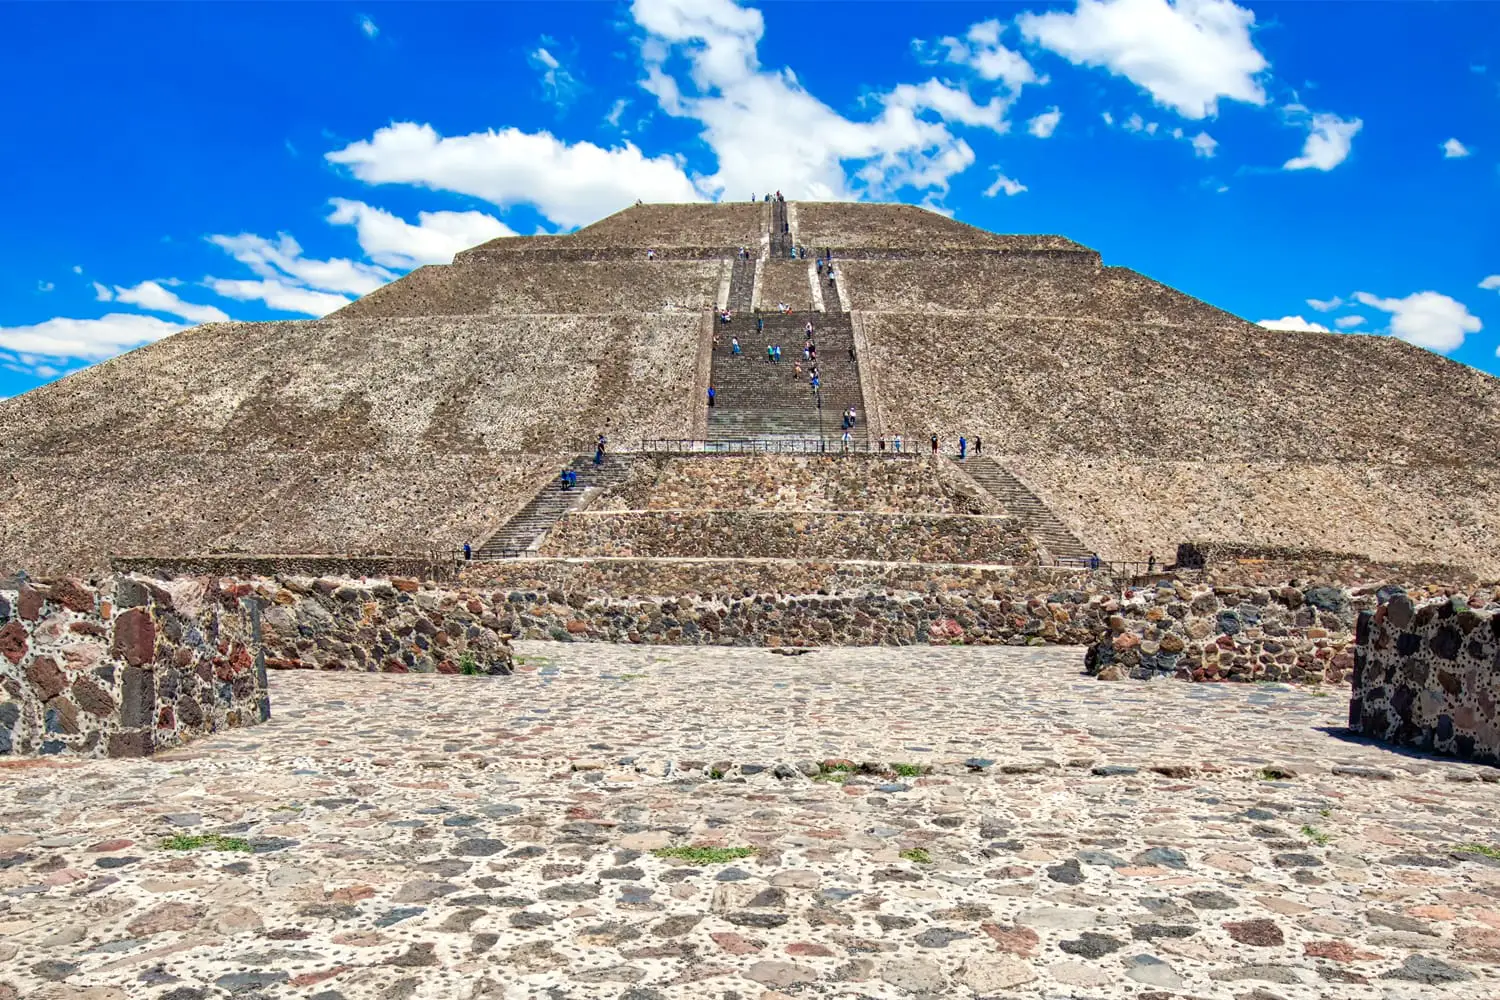 Pyramid of the Sun at Teotihuacan, near Mexico City in Mexico